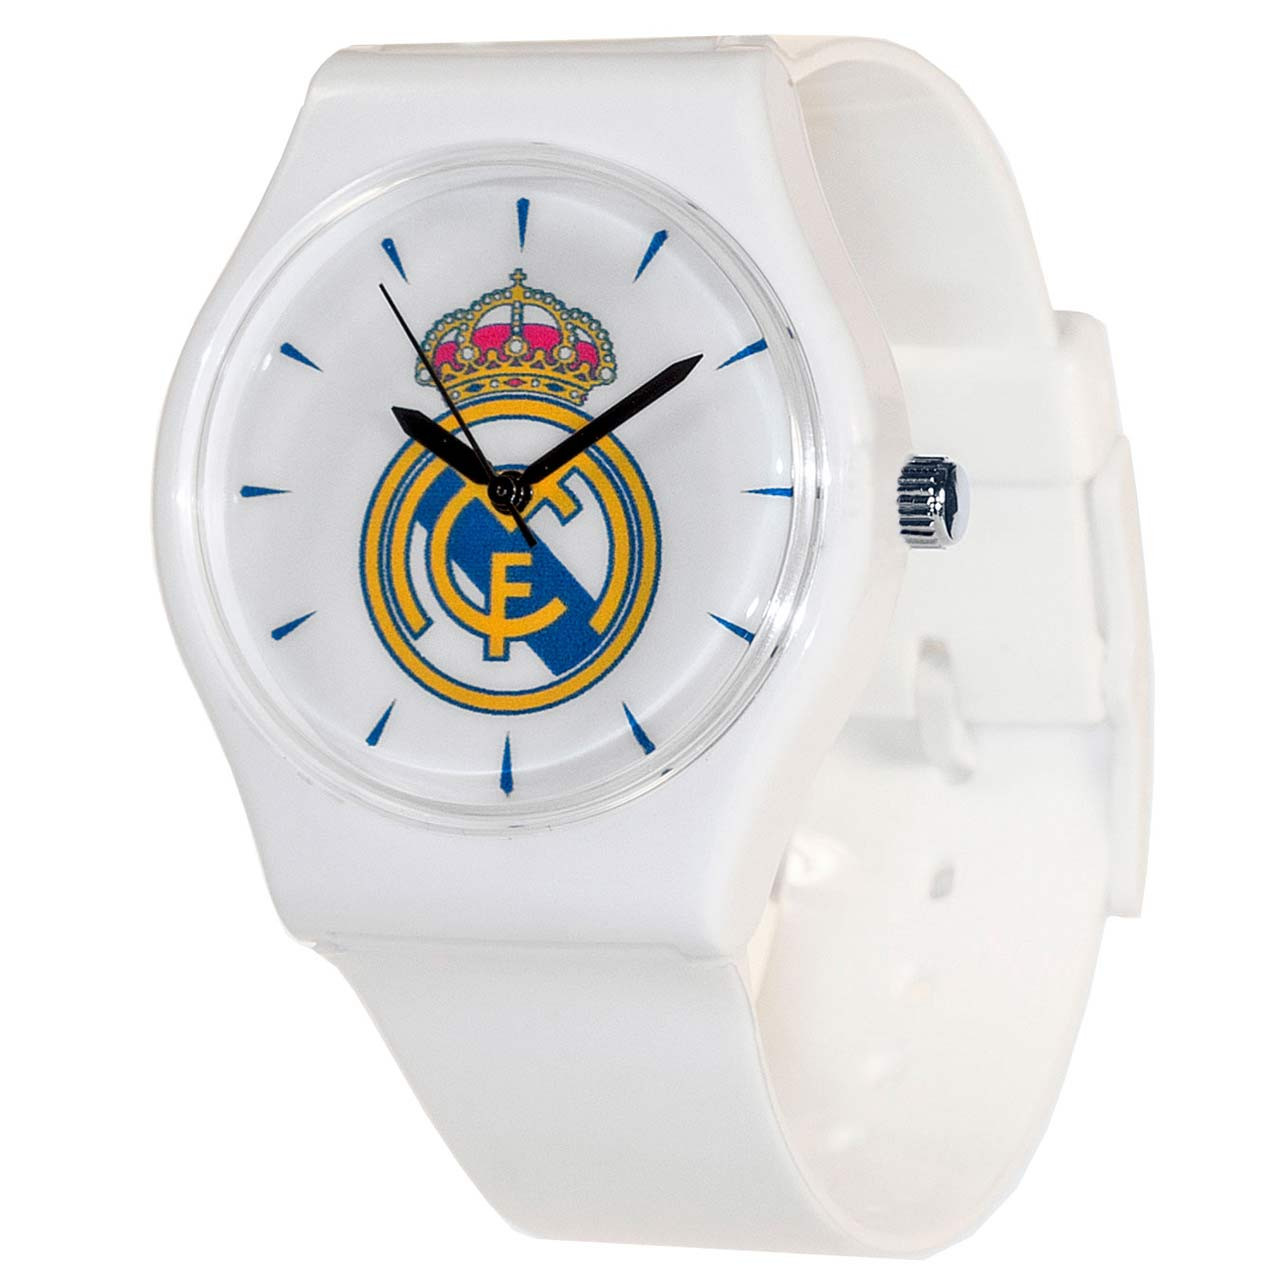 Paradoja terremoto aprender 38mm Real Madrid FC White Licensed Team Watch with Official Real Madrid Crest  - Buy Online SoccerMadUSA.